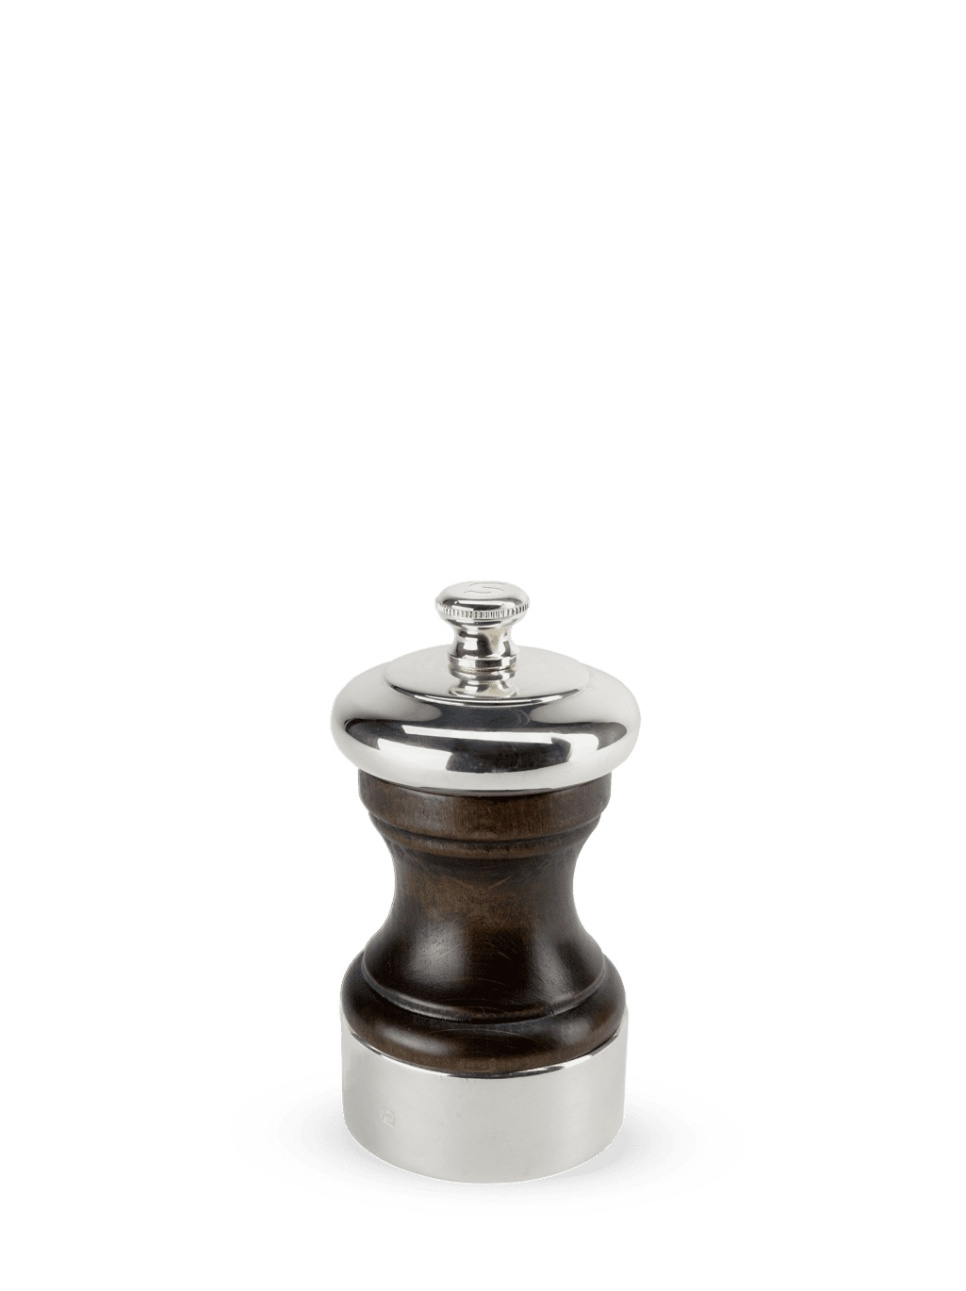 Salt mill, 10 cm, Palace - Peugeot in the group Cooking / Kitchen utensils / Salt & pepper mills at KitchenLab (1090-22252)